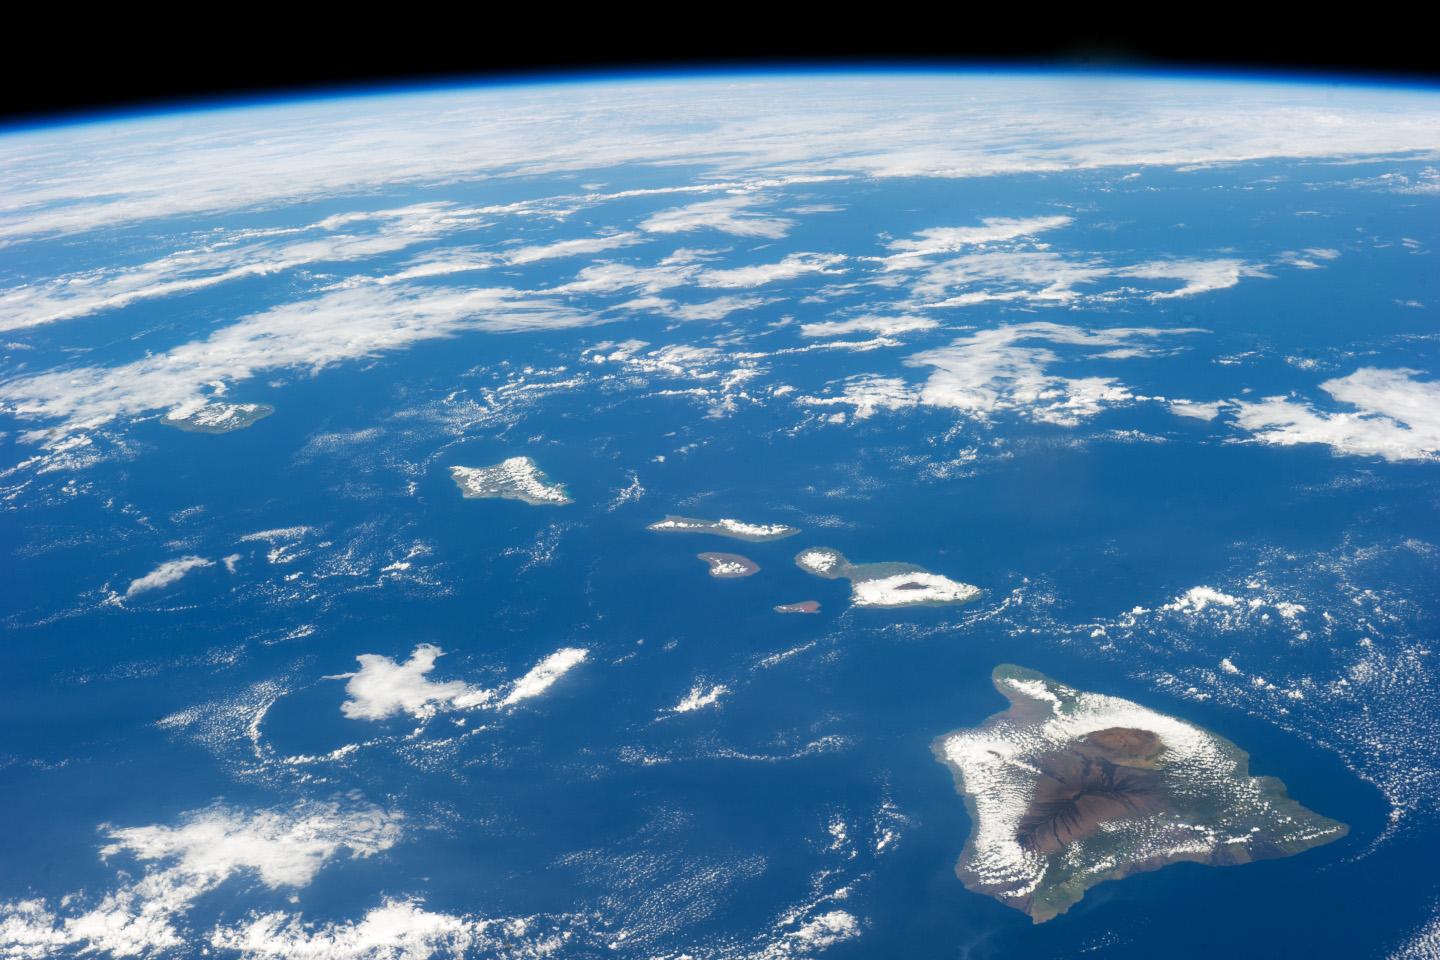 View of the Hawaiian Islands from the International Space Station